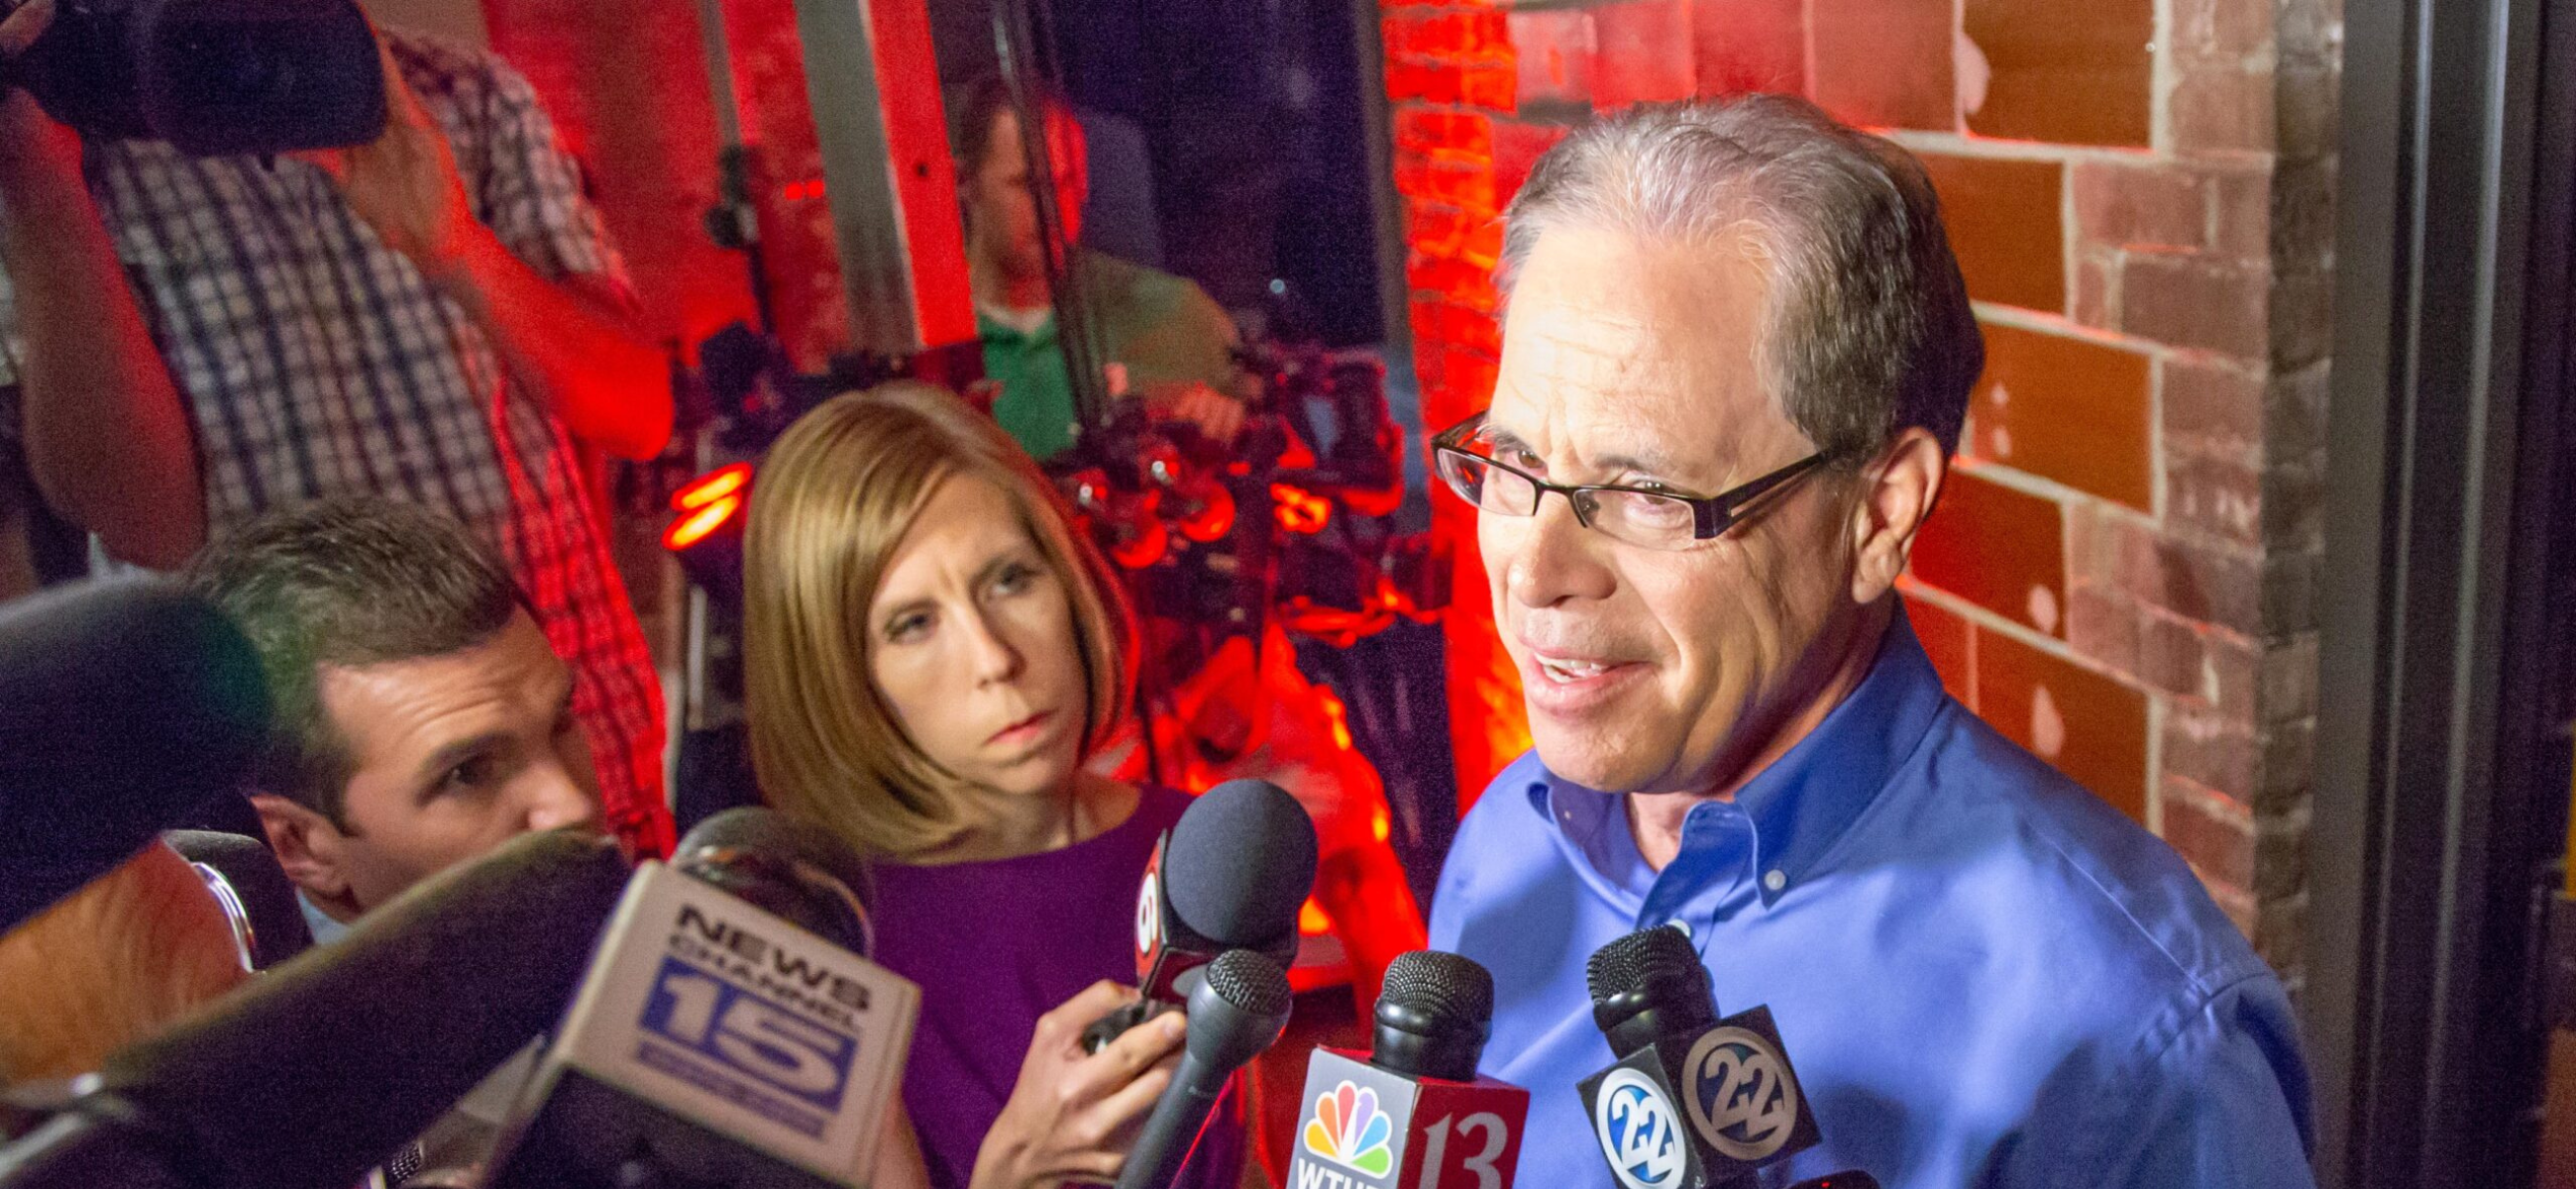 Mike Braun speaks to the media after winning the 2018 GOP U.S. Senate primary in Indiana. (Credit: Mark Curry)